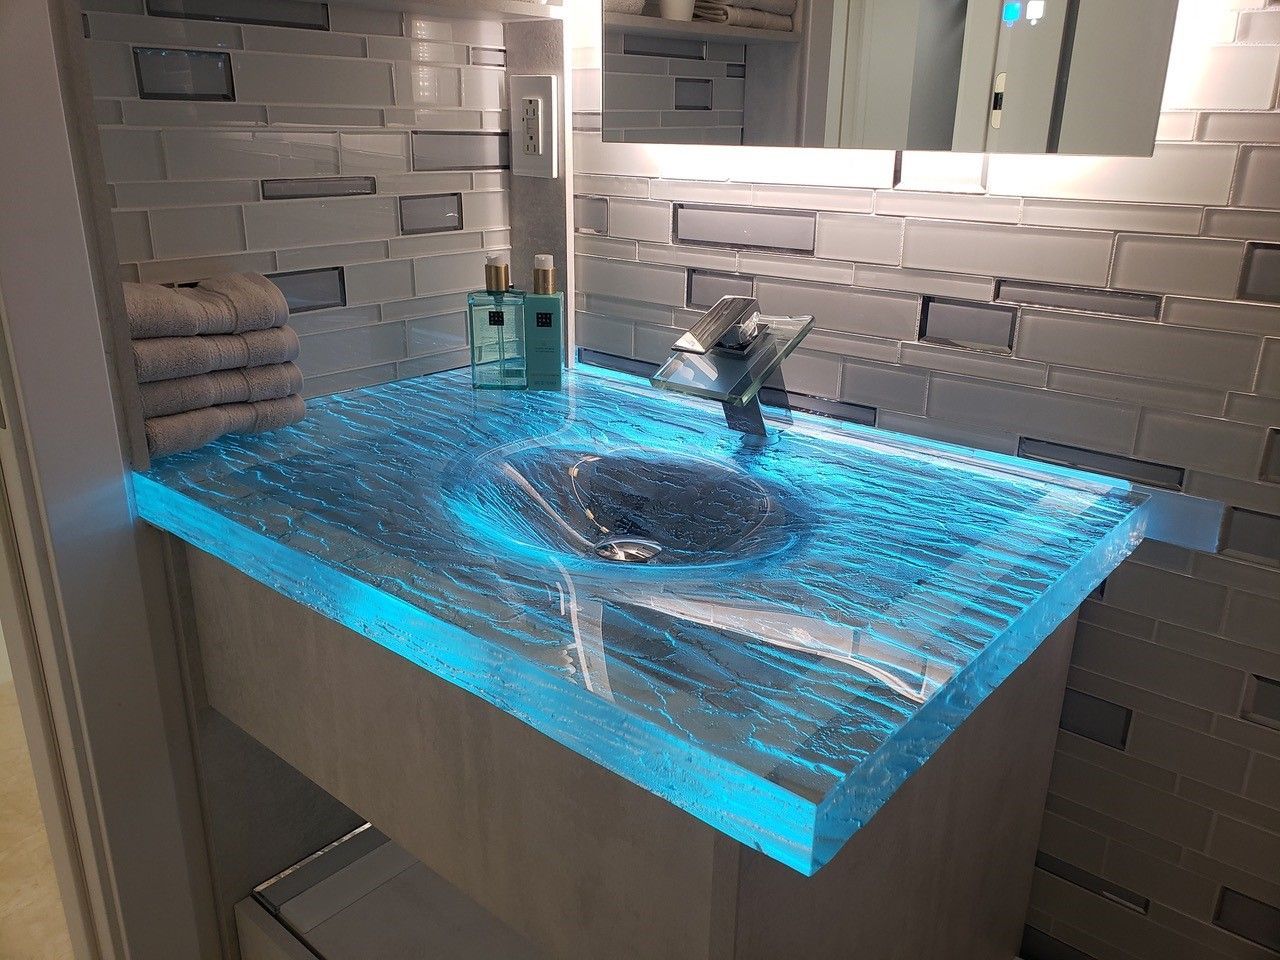 A custom glass countertop vanity in blue thick, textured glass in a residential bathroom.